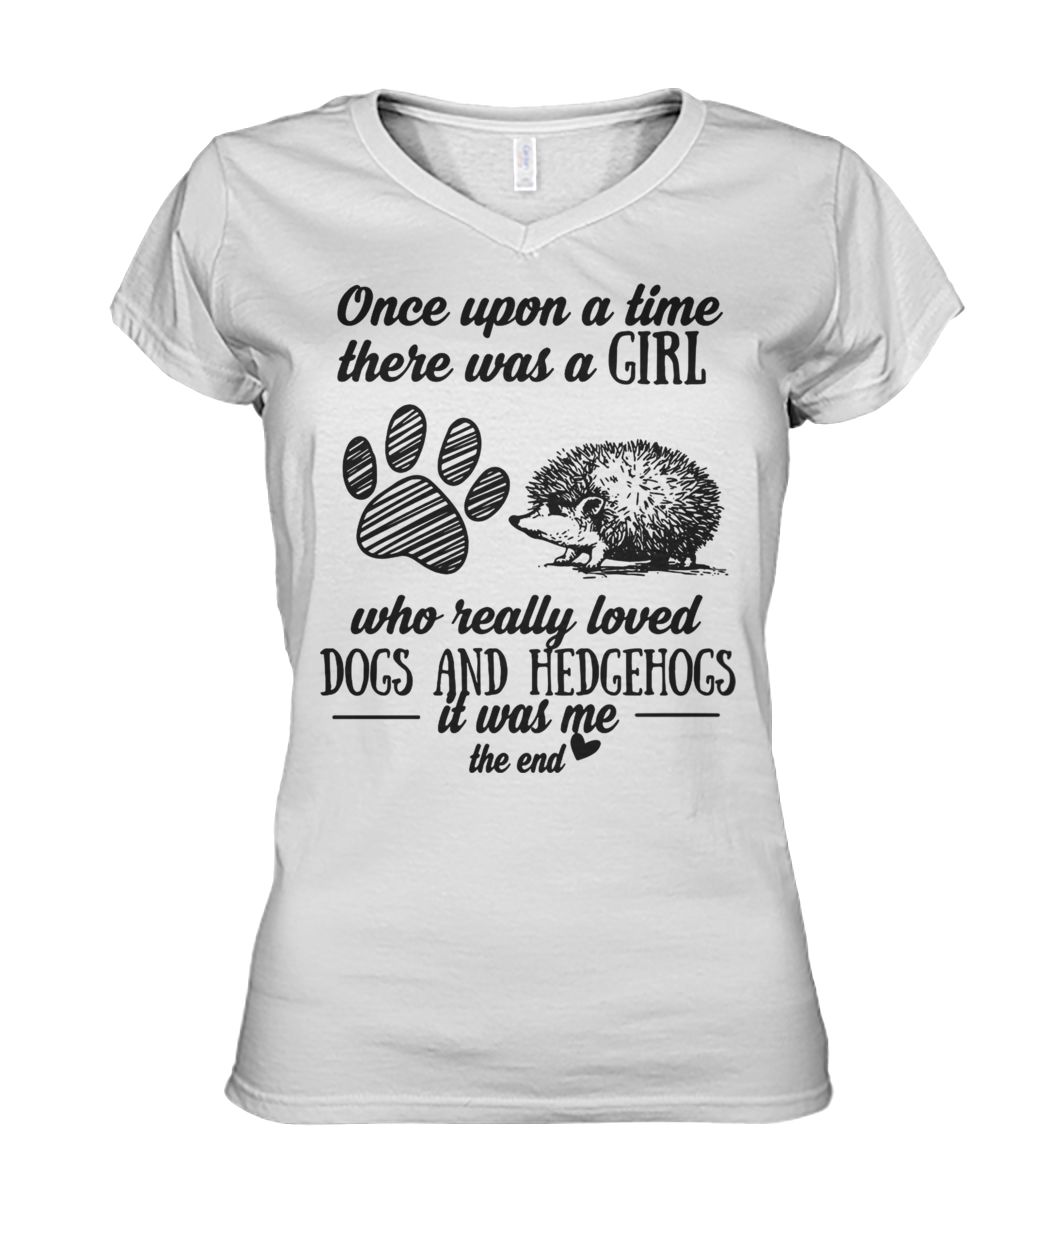 Once upon a time there was a girl who really loved dogs and hedgehogs it was me women's v-neck